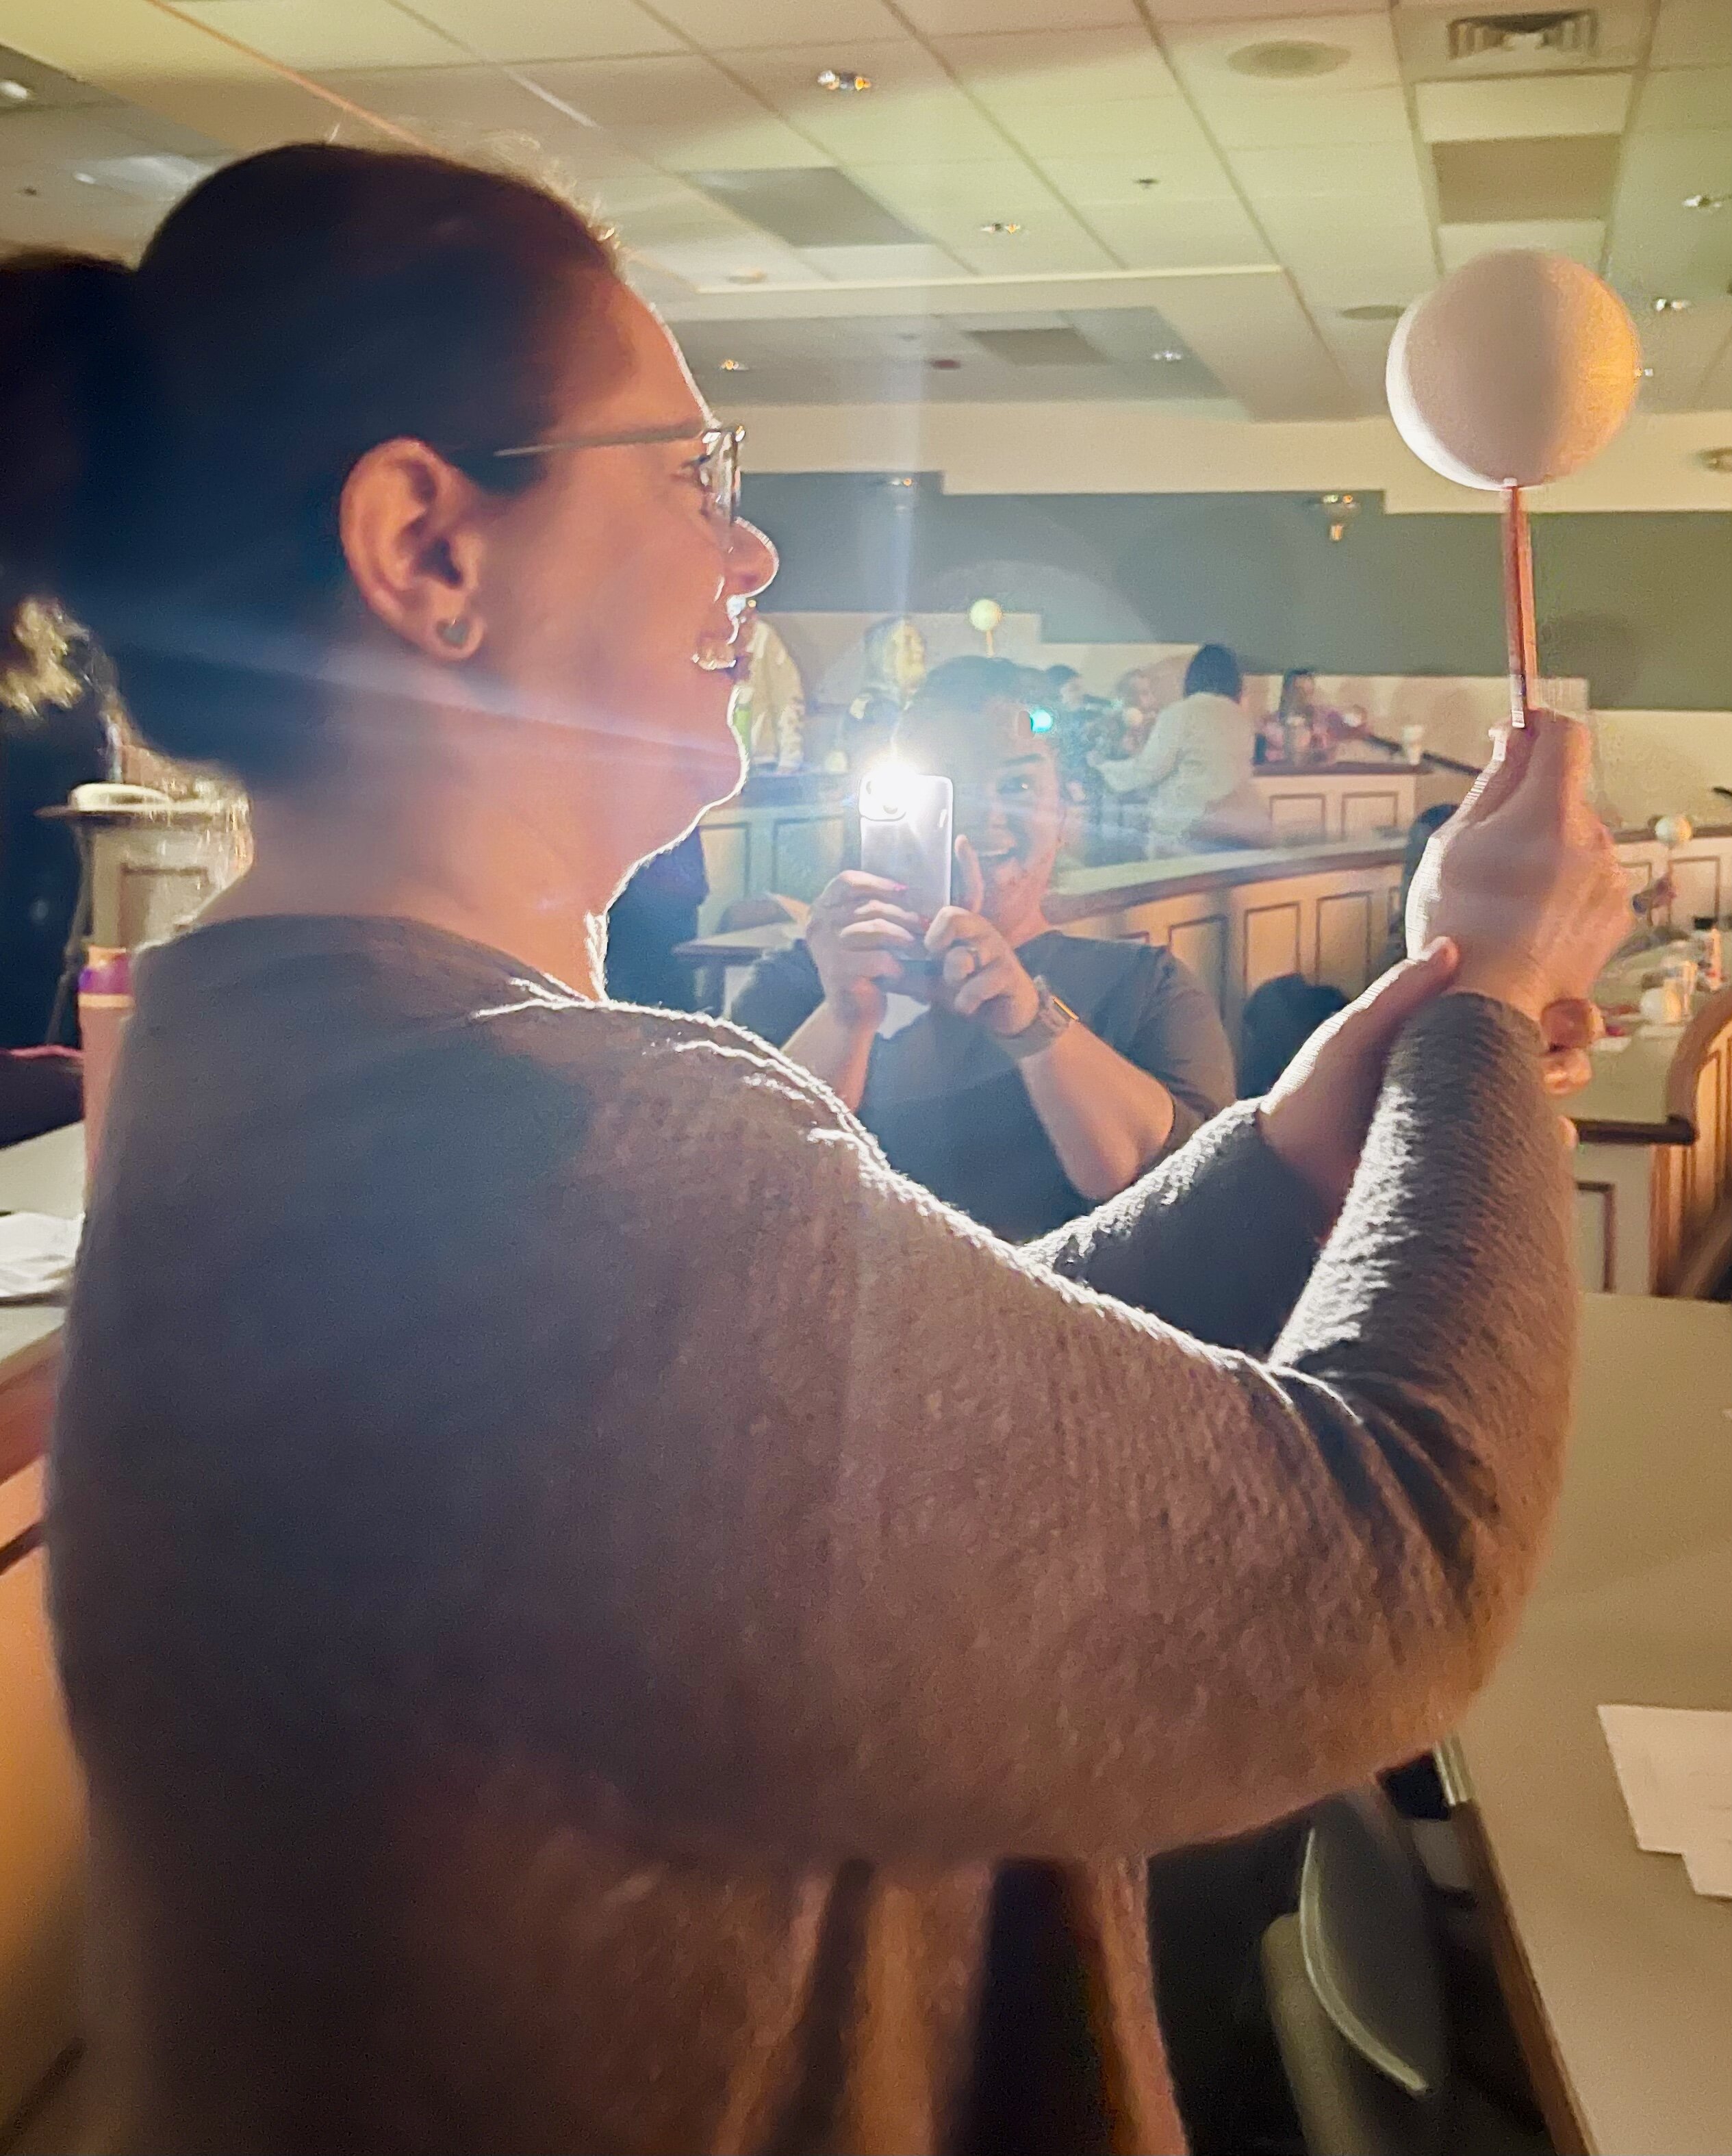 Photo of two teachers as they model the sun/moon/earth relationship with flashlights and styrofoam ball. One teacher sees the moon phases and smiles.